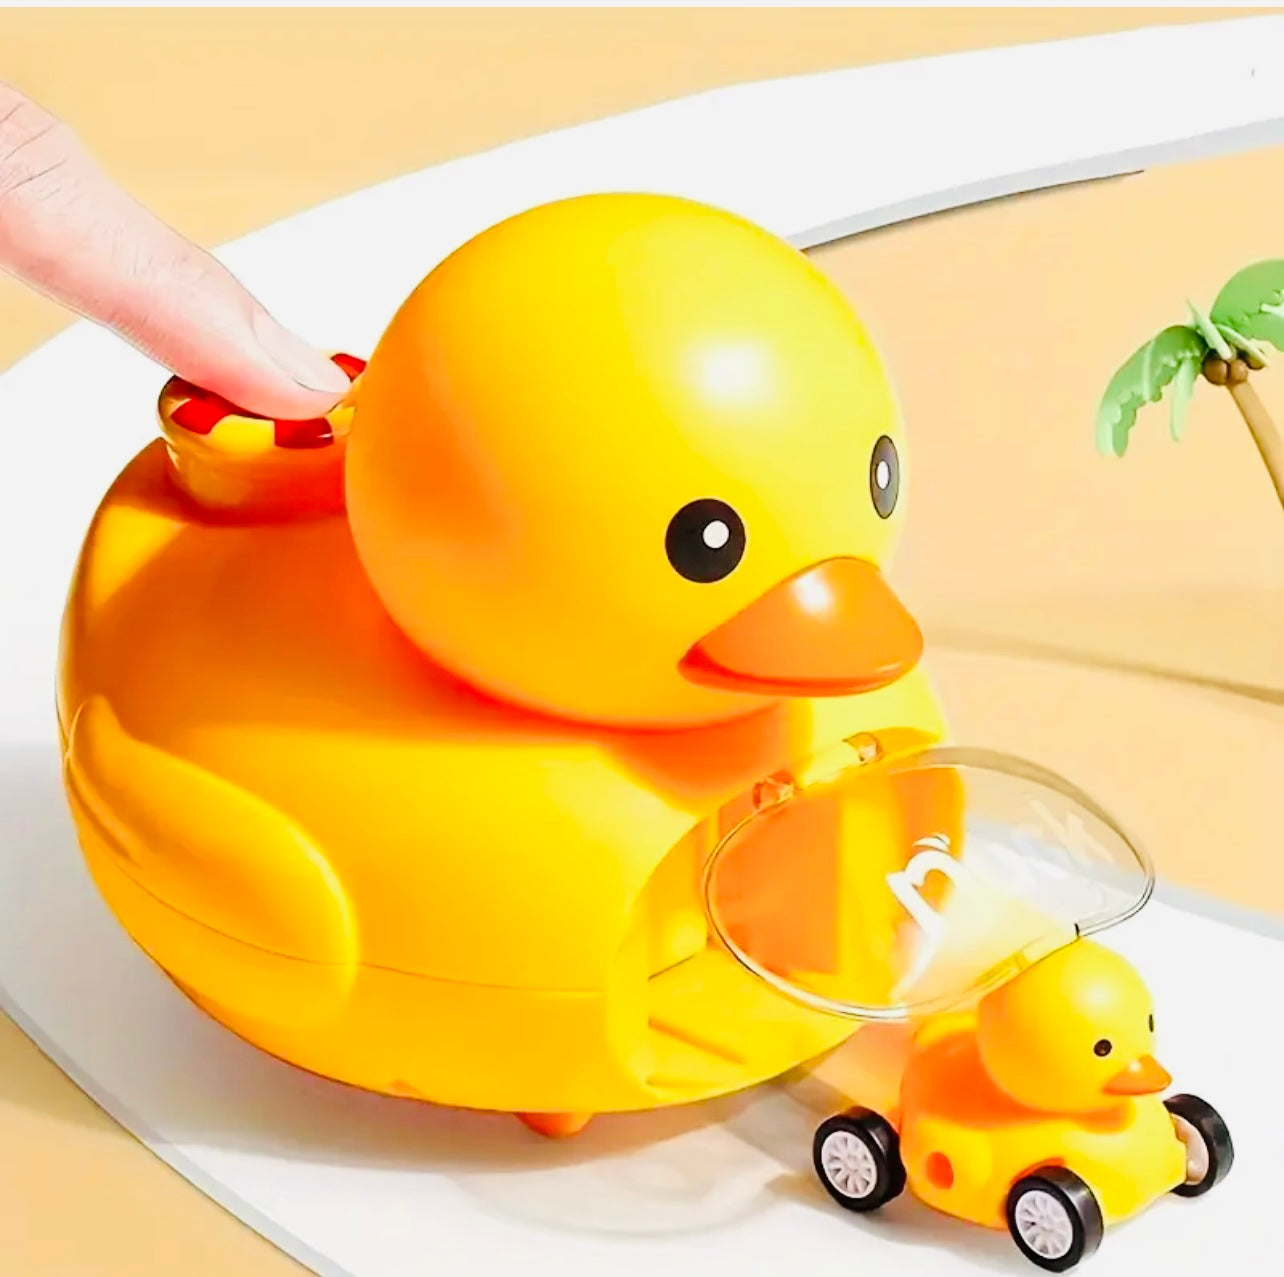 Duck ejection car toy